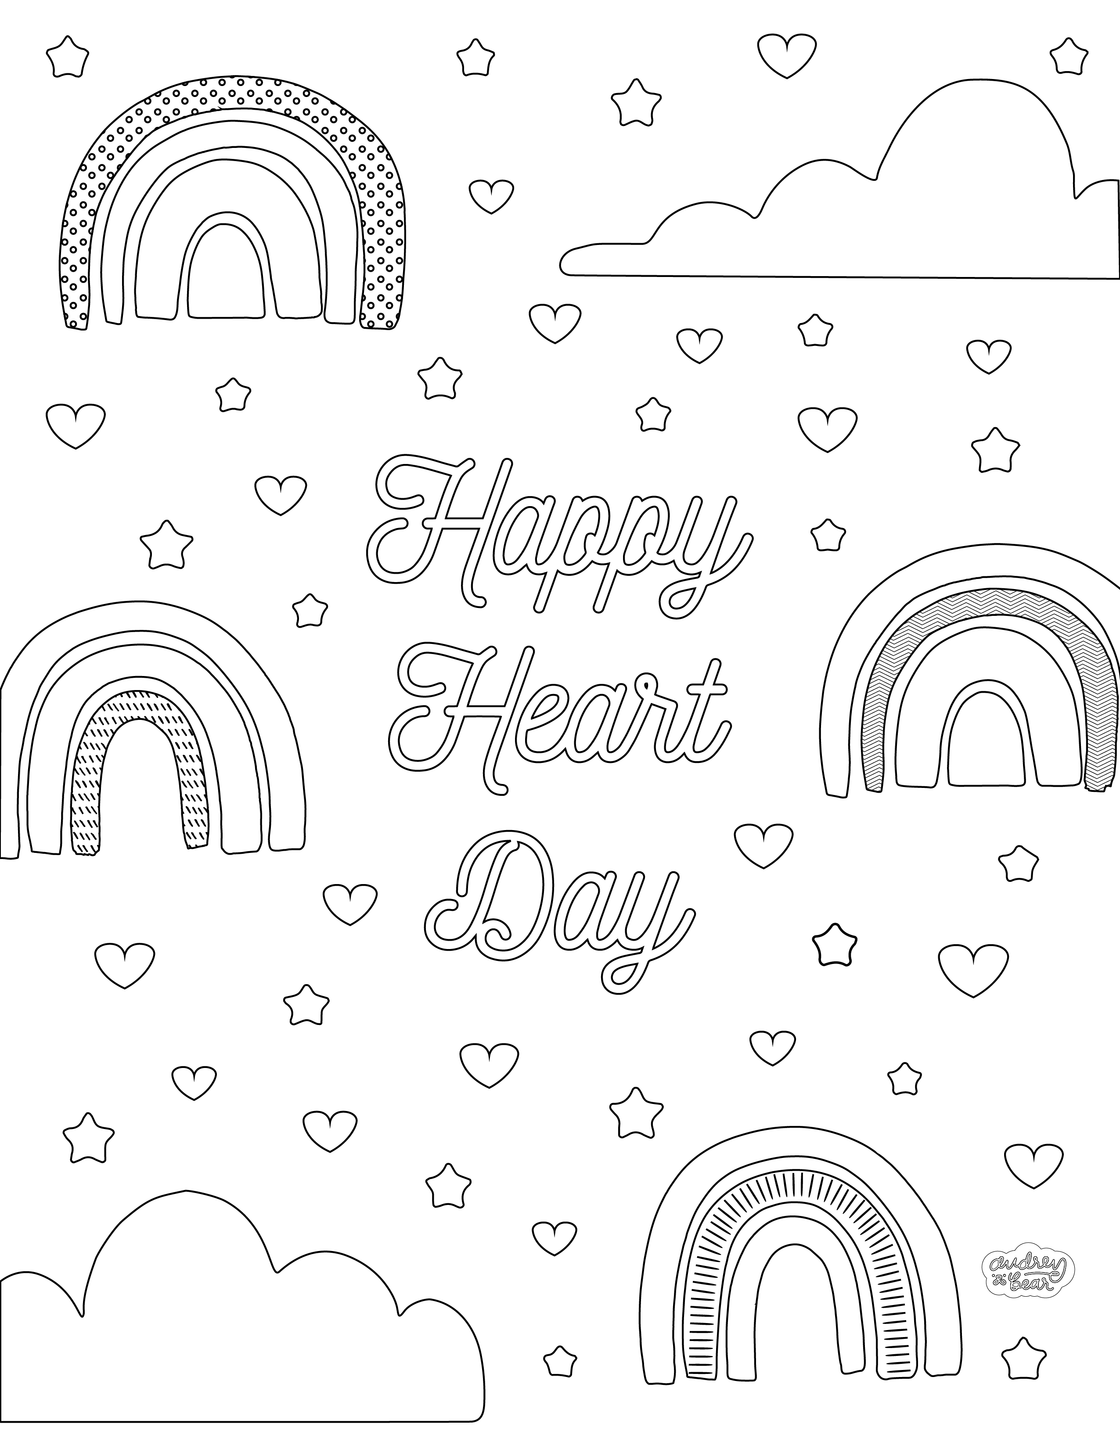 Valentine's Day Coloring Fun for Kids!